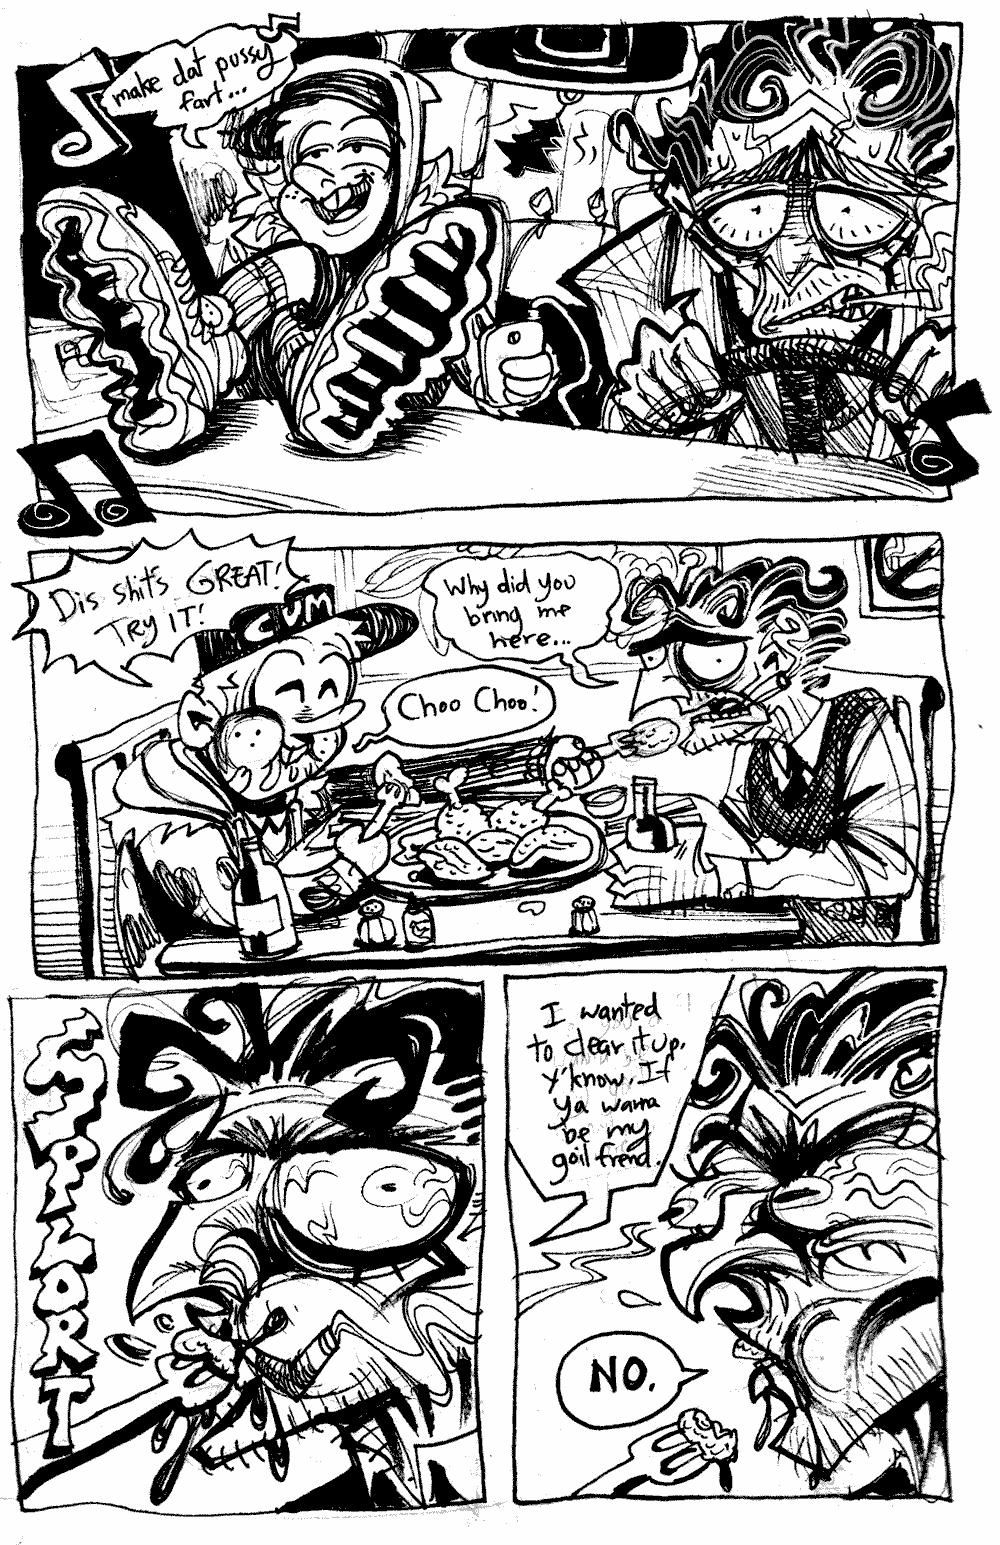 Page 20 - Ollie sings 'Make dat pussy fart...' as he relaxes in Basile's car, stretching his shoes over the dashboard.  Basile drives nervously and smoking.  In the restaraunt, Ollie eats happily and shoves food in Basile's zonked mouth.  'Dis shit's GREAT!  TRY IT!'  'Why did you bring me here...' 'Choo choo!'.  A forkfull of chicken squeezes into Baslie's mouth with a SPLORT.  Ollie finally answers.  'I wanted to clear it up. Y'know.  If you wanna be my goilfriend.'  Basile answers with a stern expression.  'NO.'